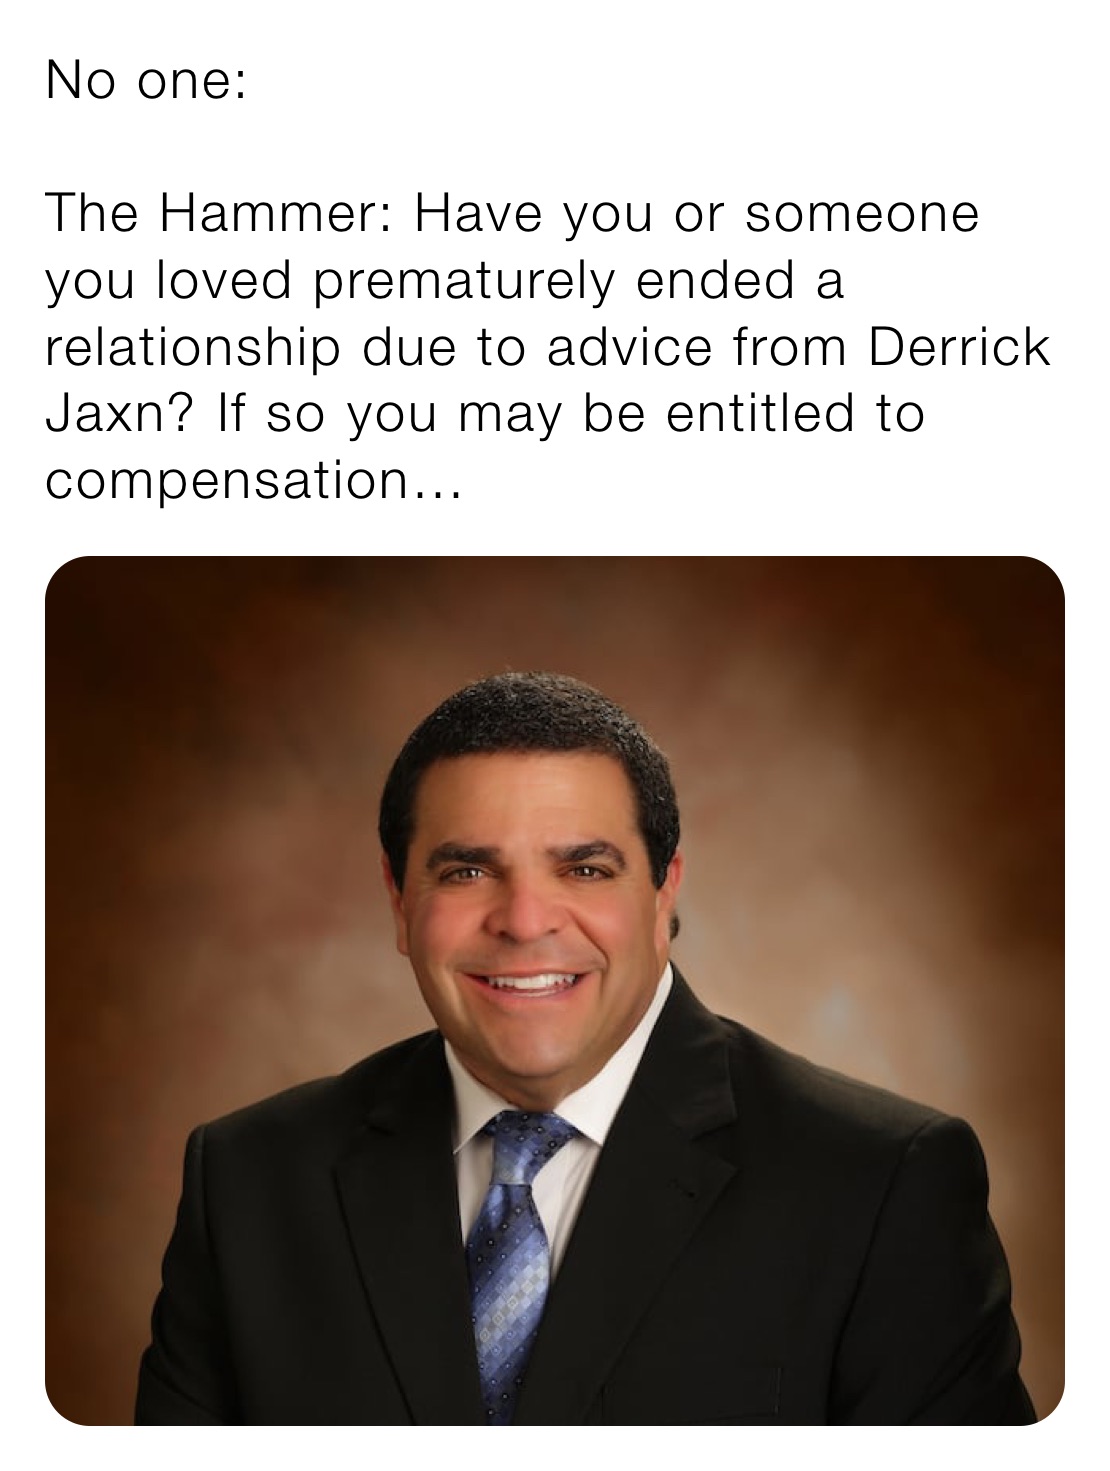 No one:

The Hammer: Have you or someone you loved prematurely ended a relationship due to advice from Derrick Jaxn? If so you may be entitled to compensation…